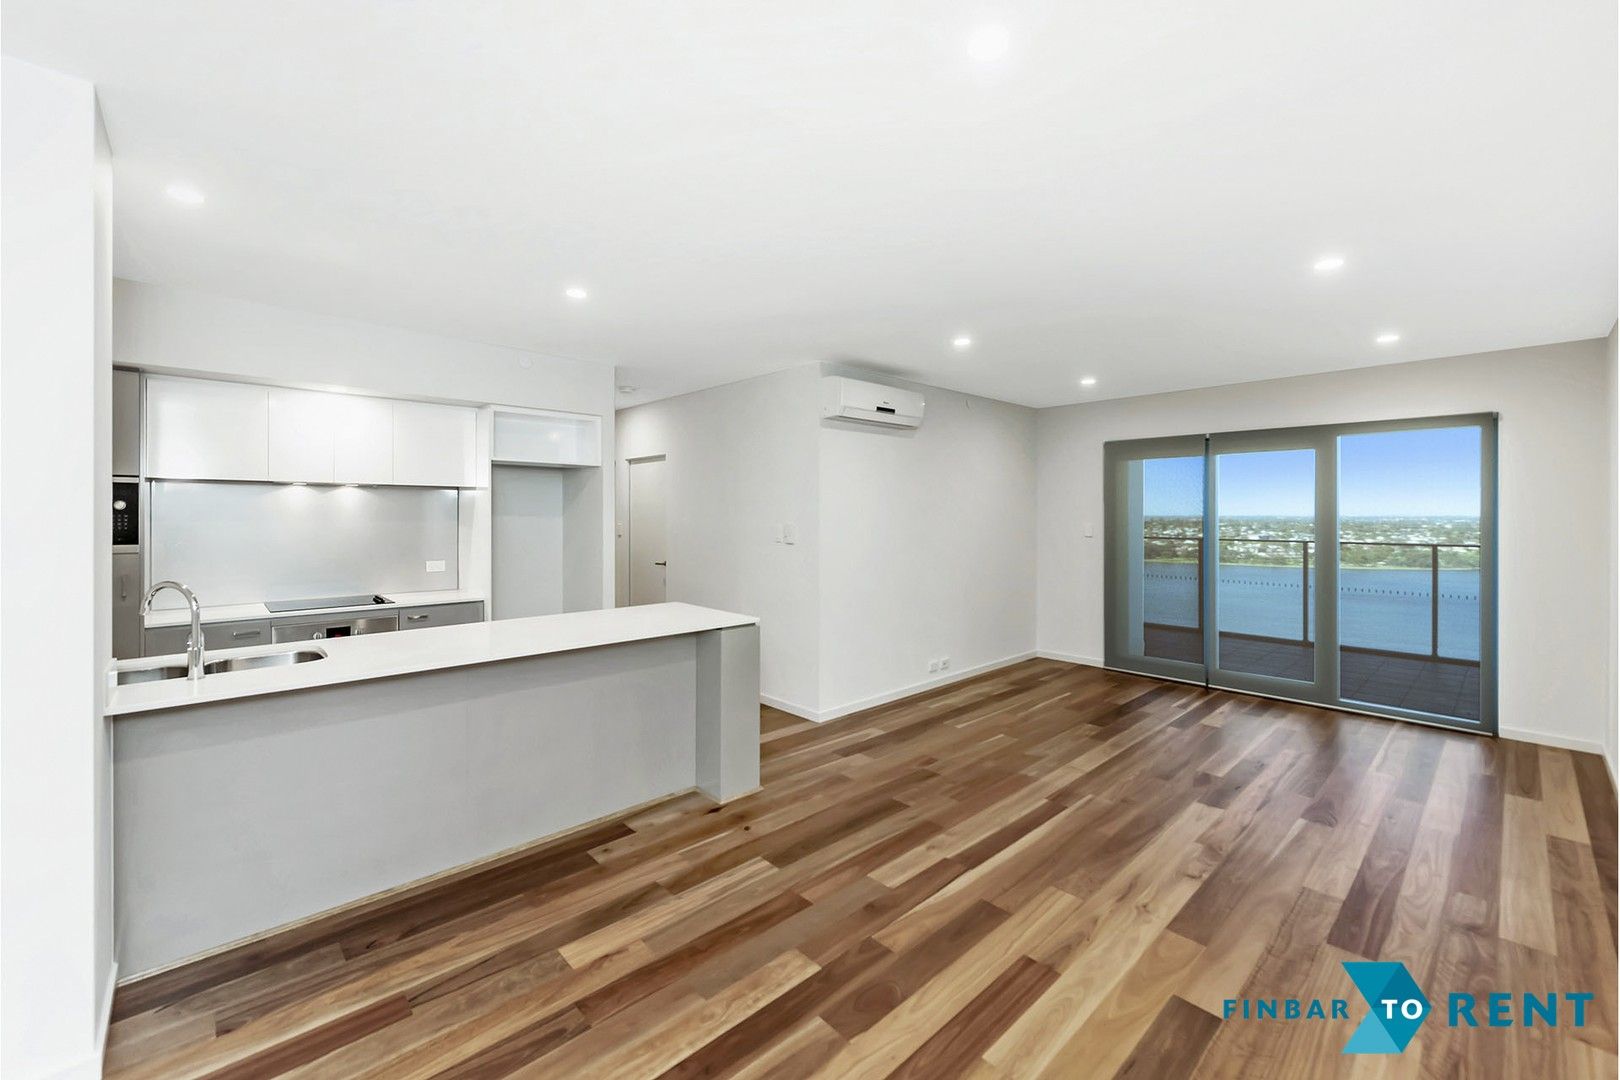 2 bedrooms Apartment / Unit / Flat in 901/63 Adelaide Terrace EAST PERTH WA, 6004